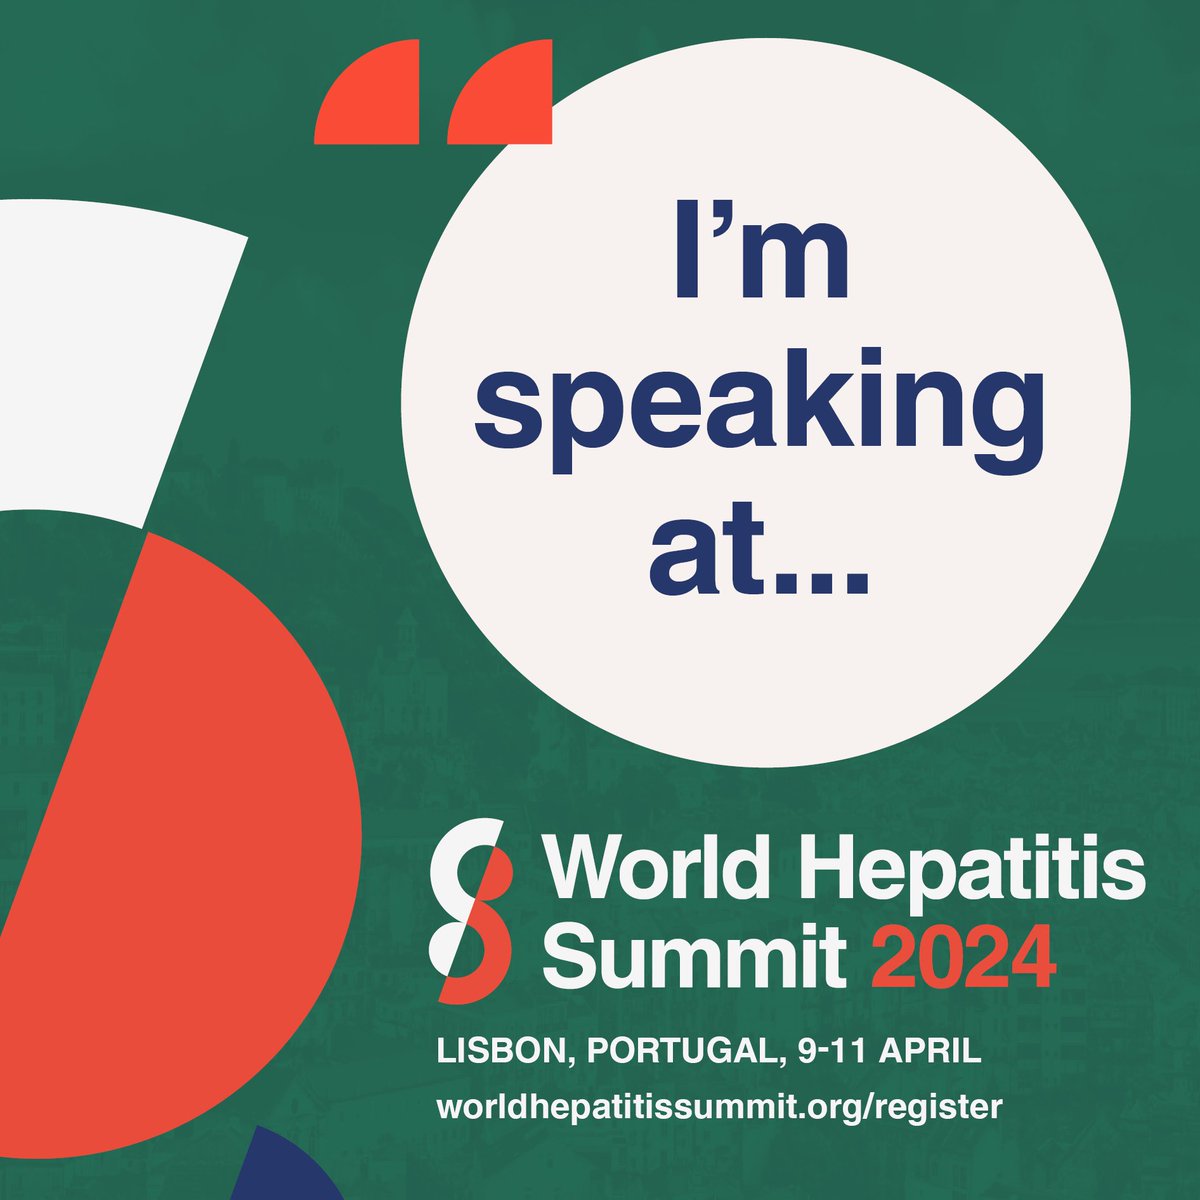 I’m excited to be speaking at the World Hepatitis Summit 2024. My talk will focus on viral hepatitis prevalence among Mongolian youth. #WorldHepatitisSummit